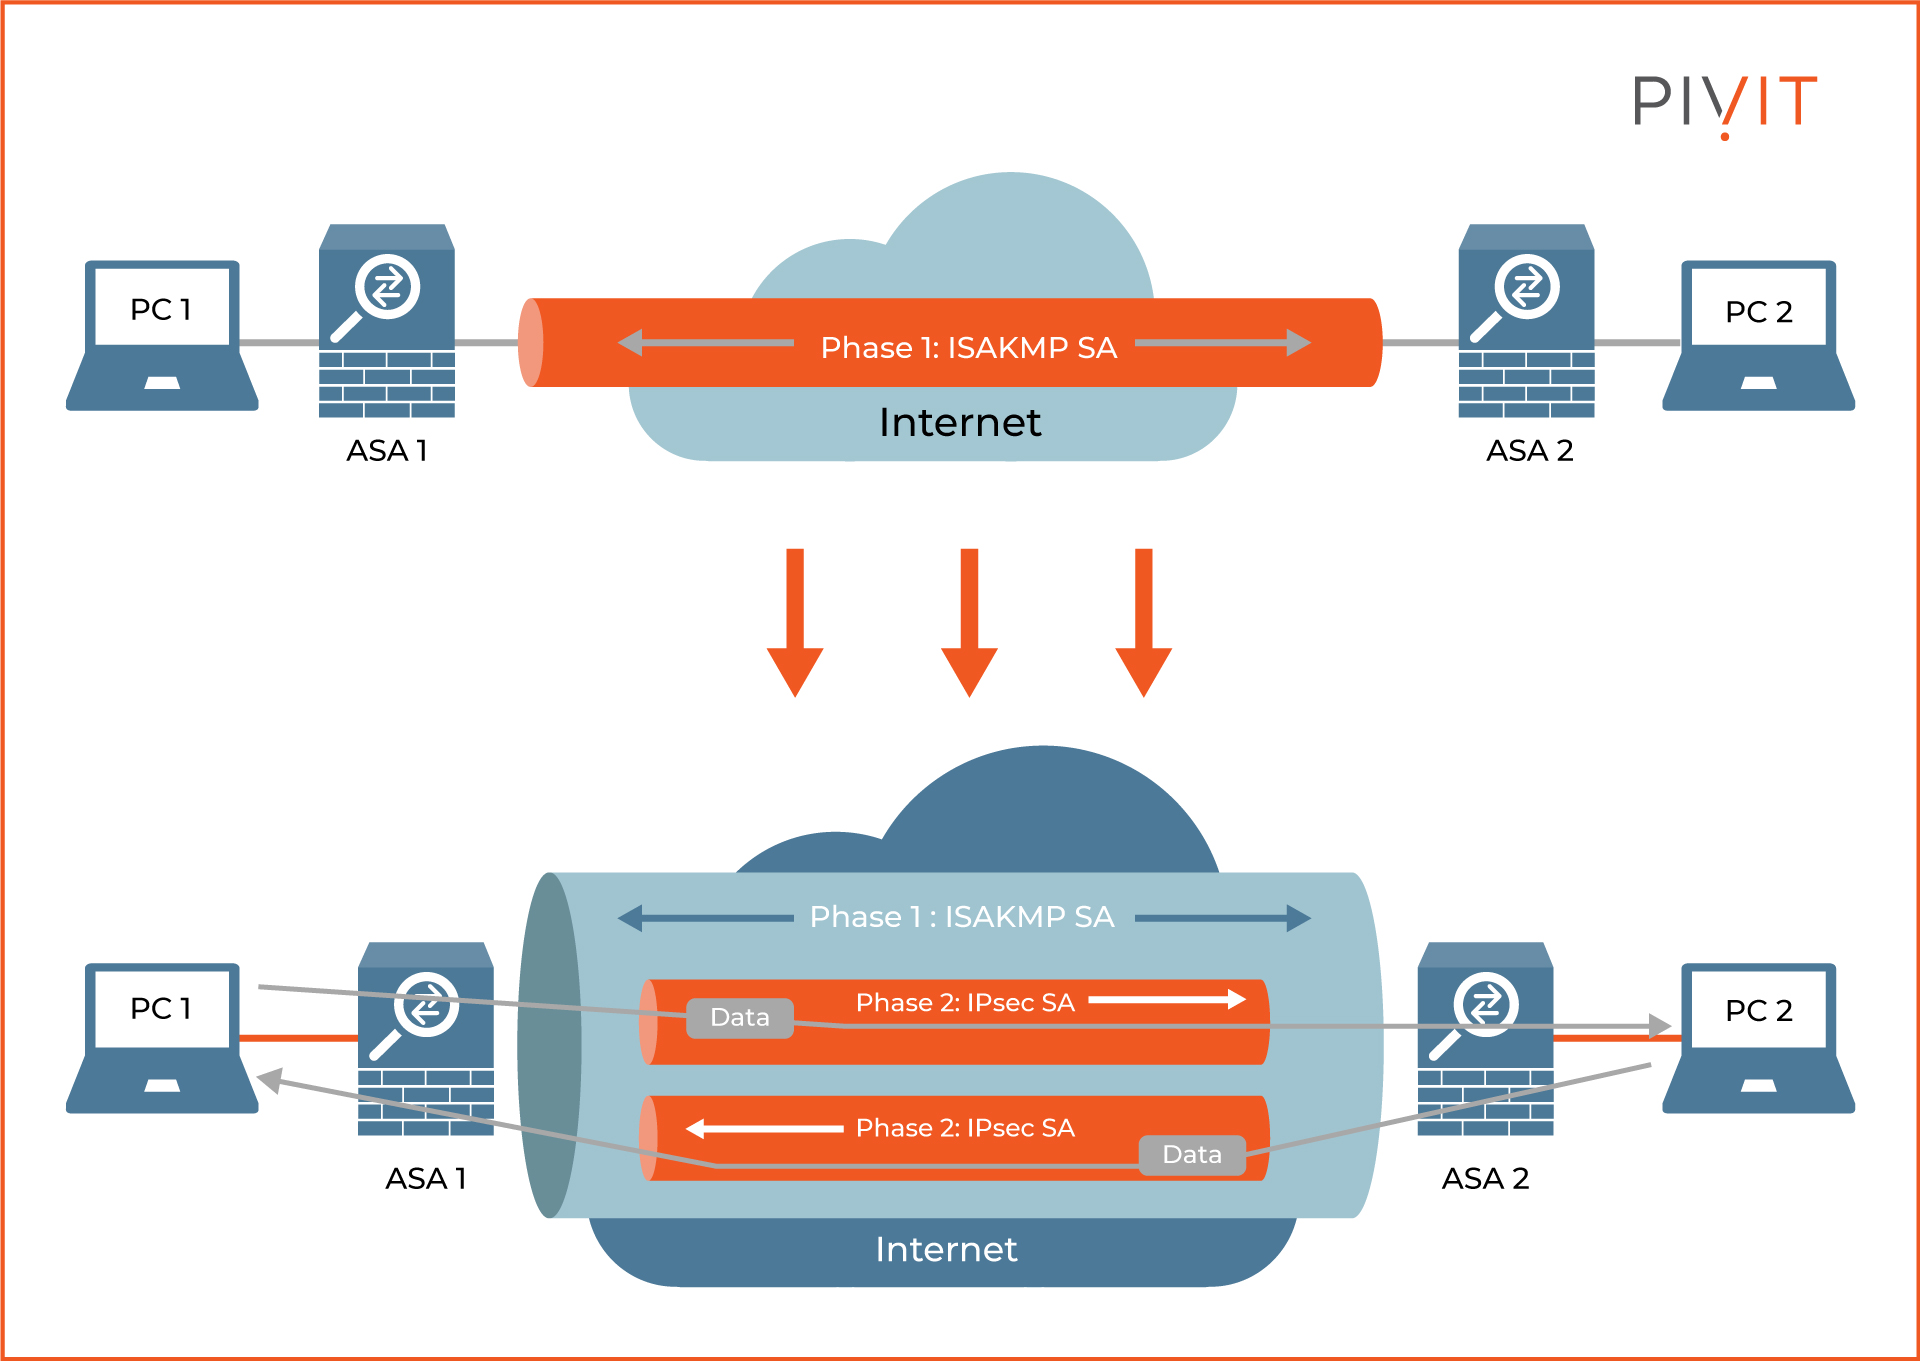 Overview of the site-to-site tunnel negotiation process between two Cisco ASA firewalls